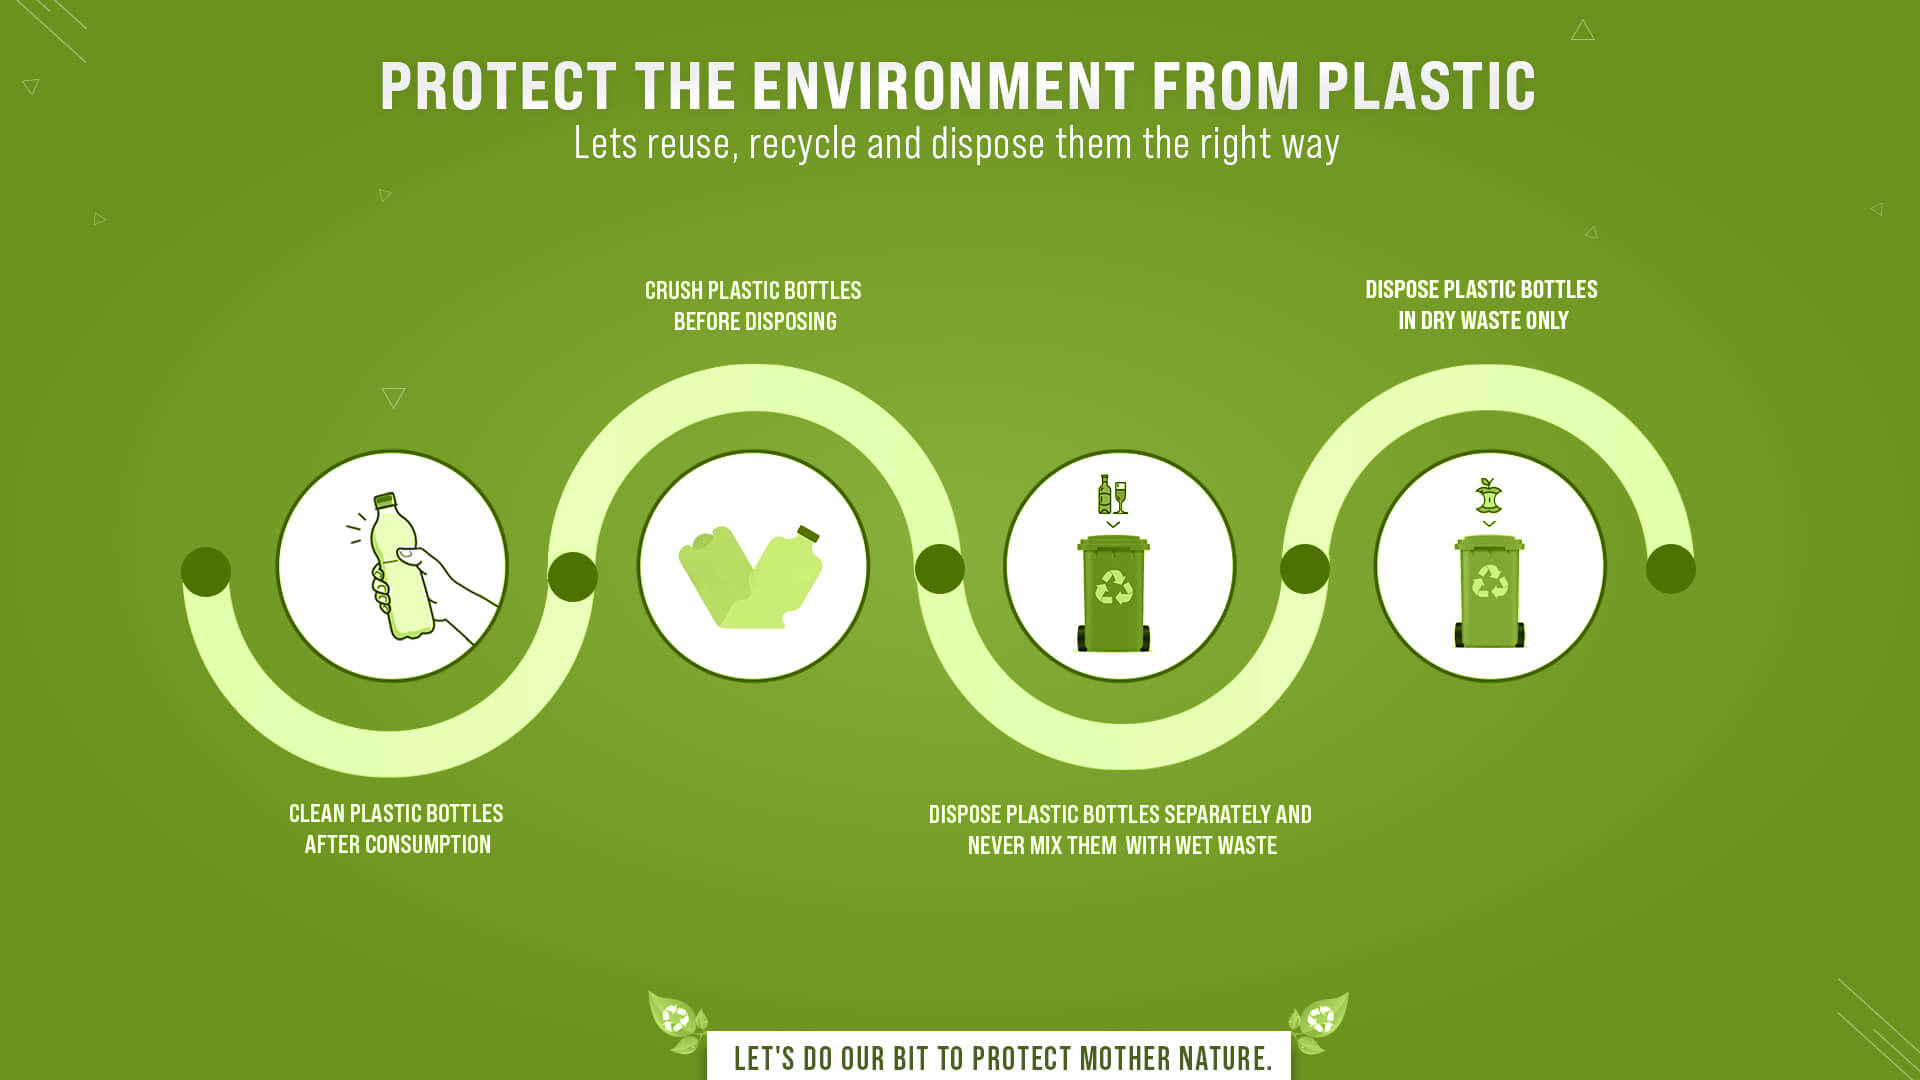 Protect the environment from plastic